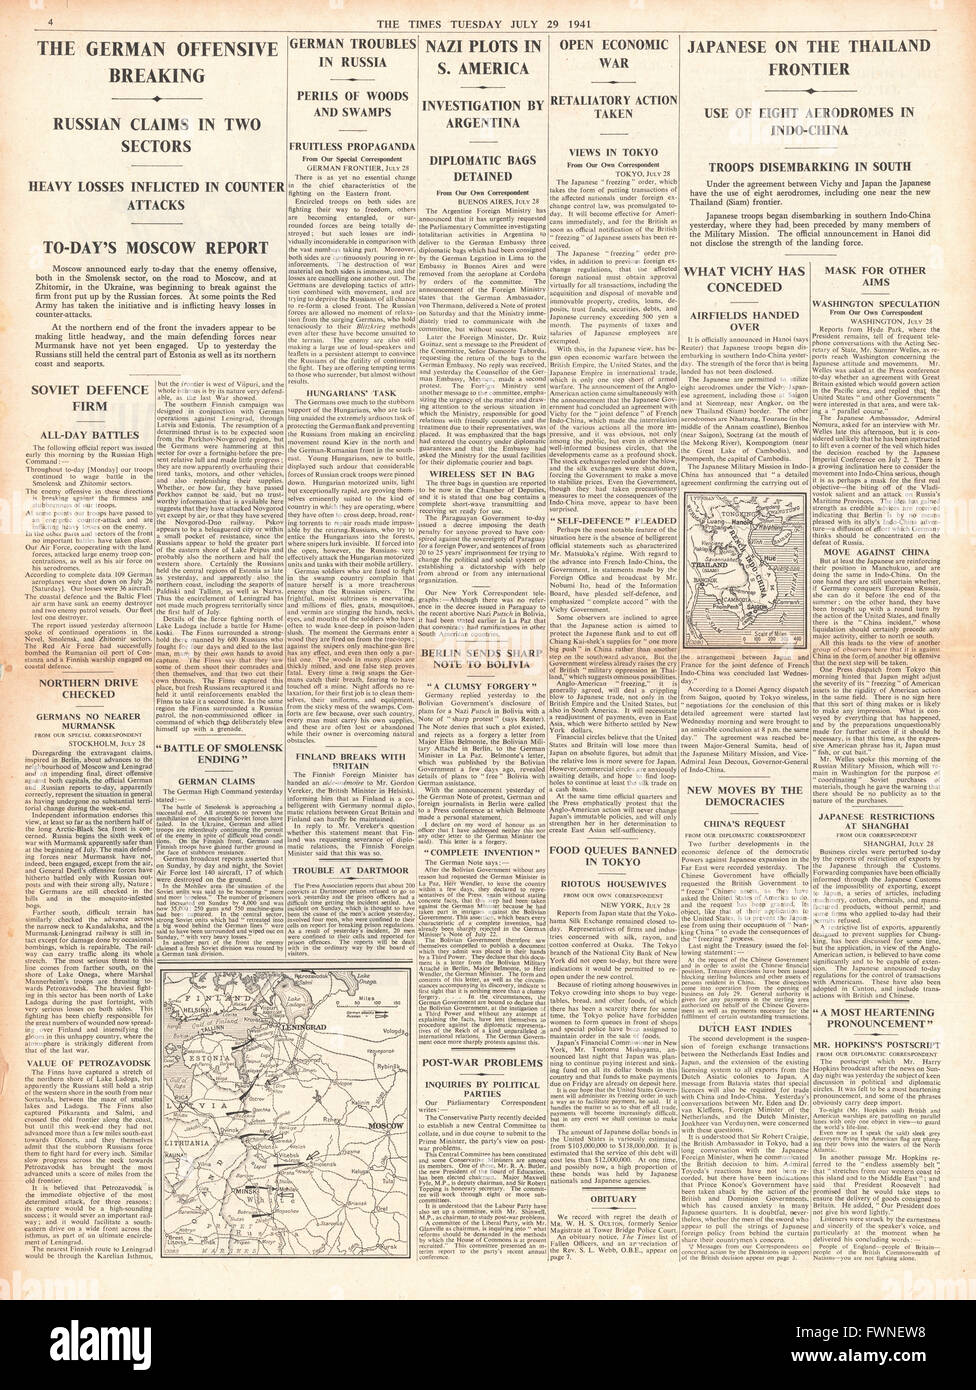 1941 page 4  The Times Moscow Claim German Offensive Breaking and Japanese Forces on Border of Thailand Stock Photo